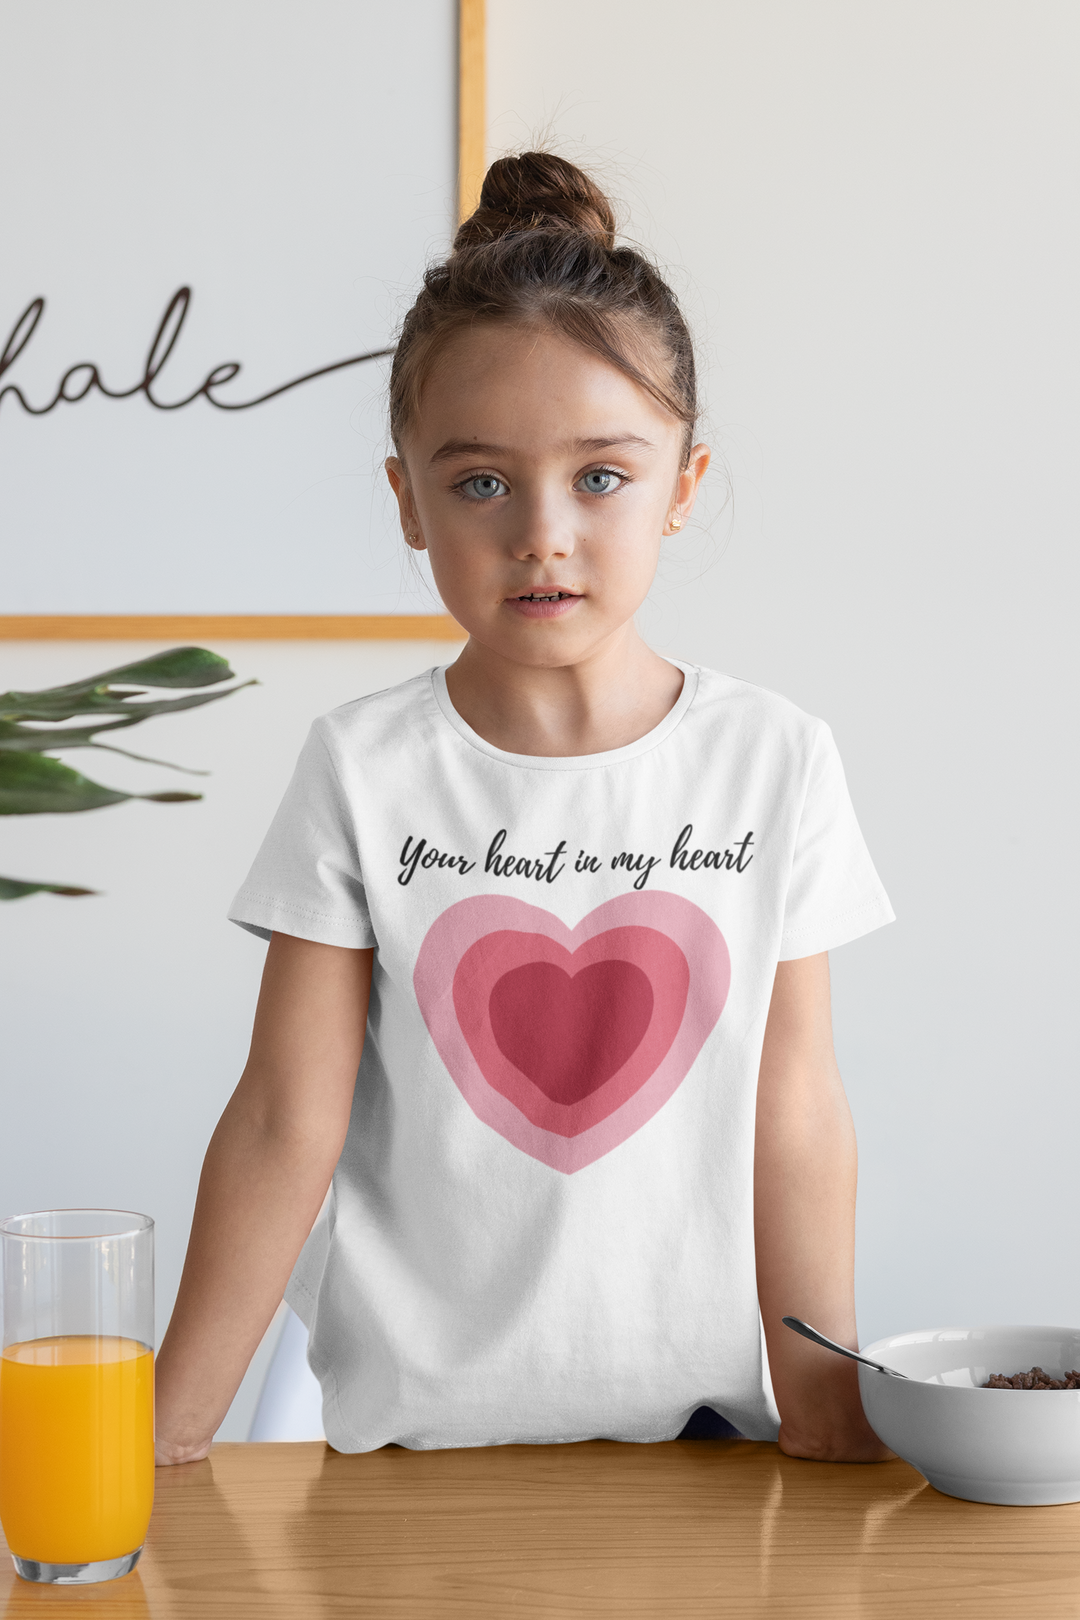 Your heart in my heart. Short sleeve t shirt for toddler and kids. - TeesForToddlersandKids -  t-shirt - holidays, Love - valentines-day-short-sleeve-t-shirt-your-heart-in-my-heart